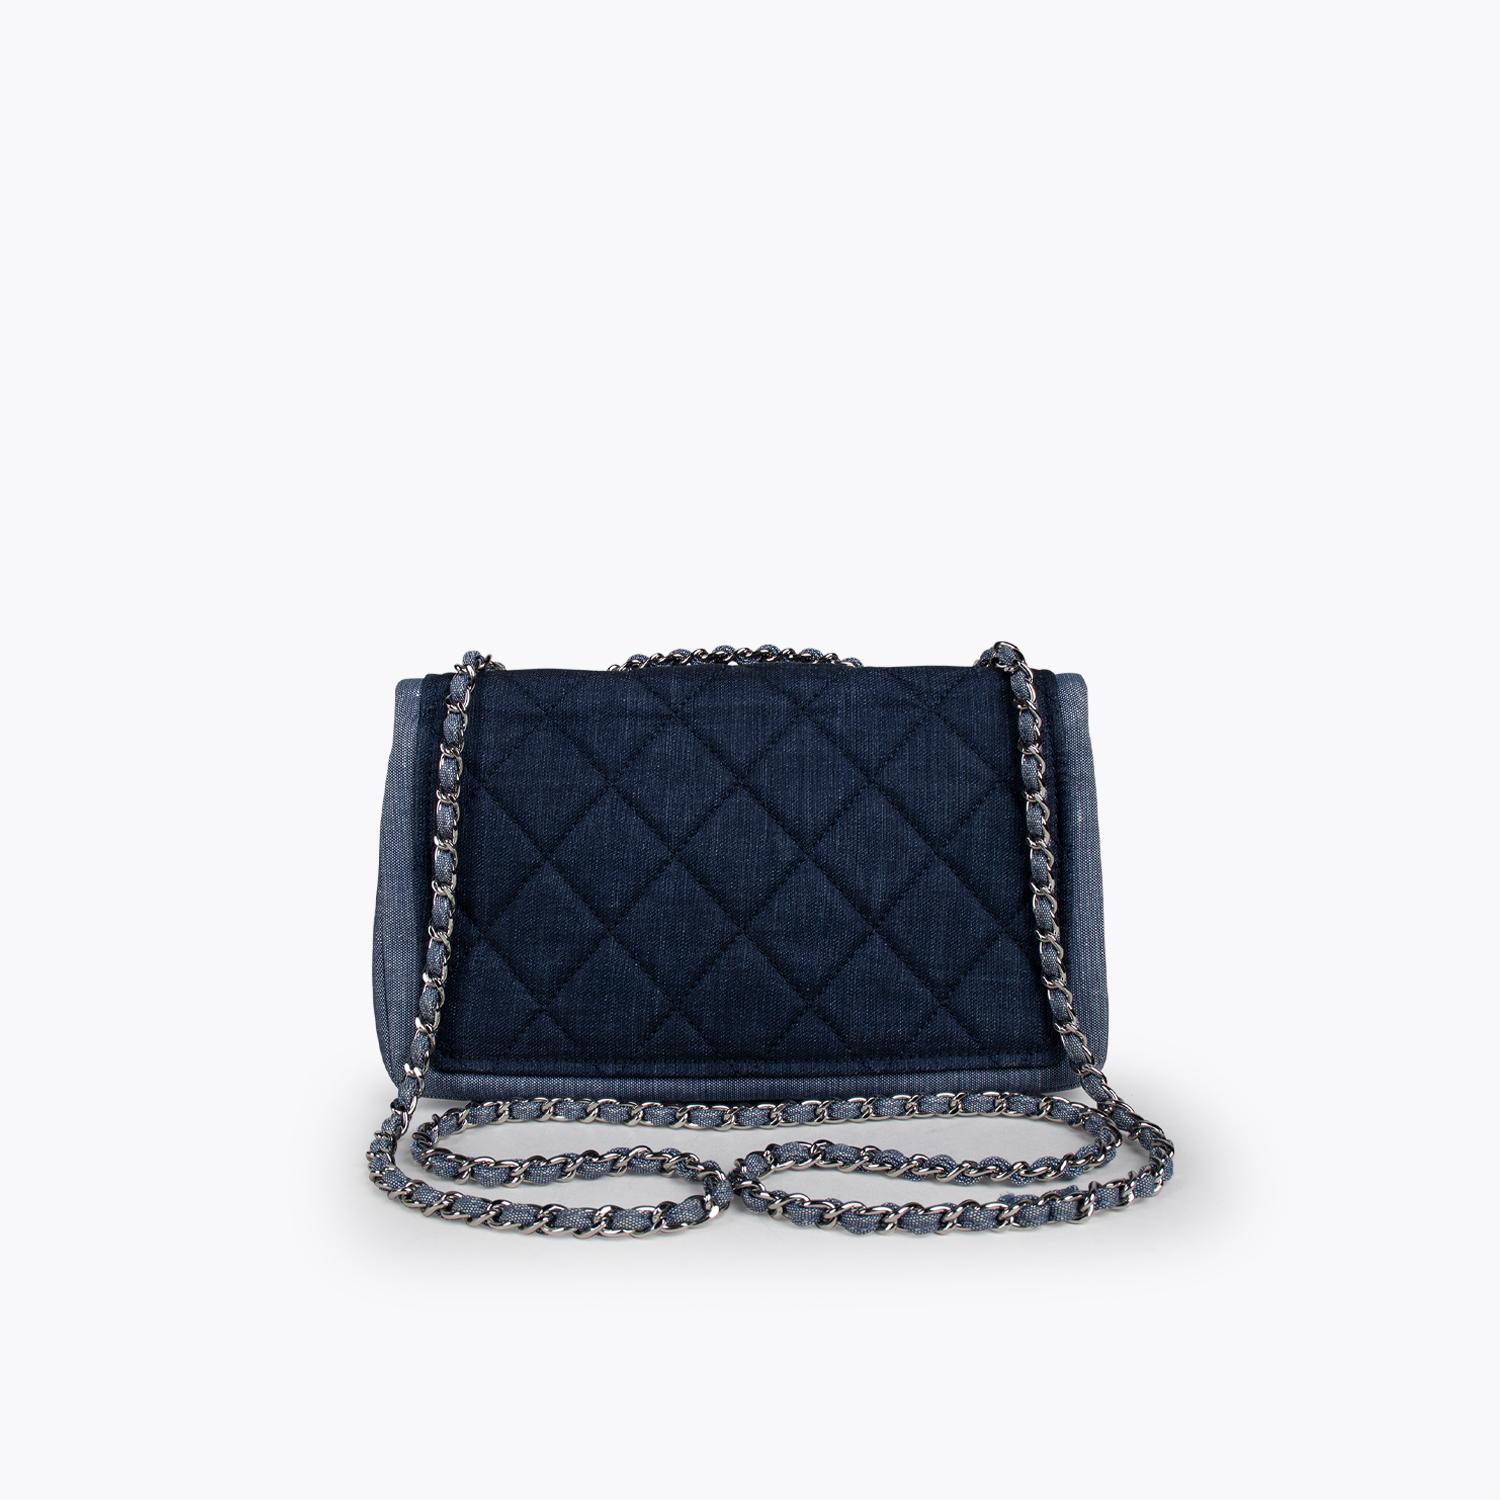 Chanel Denim Classic Flap Bag In Excellent Condition For Sale In Sundbyberg, SE